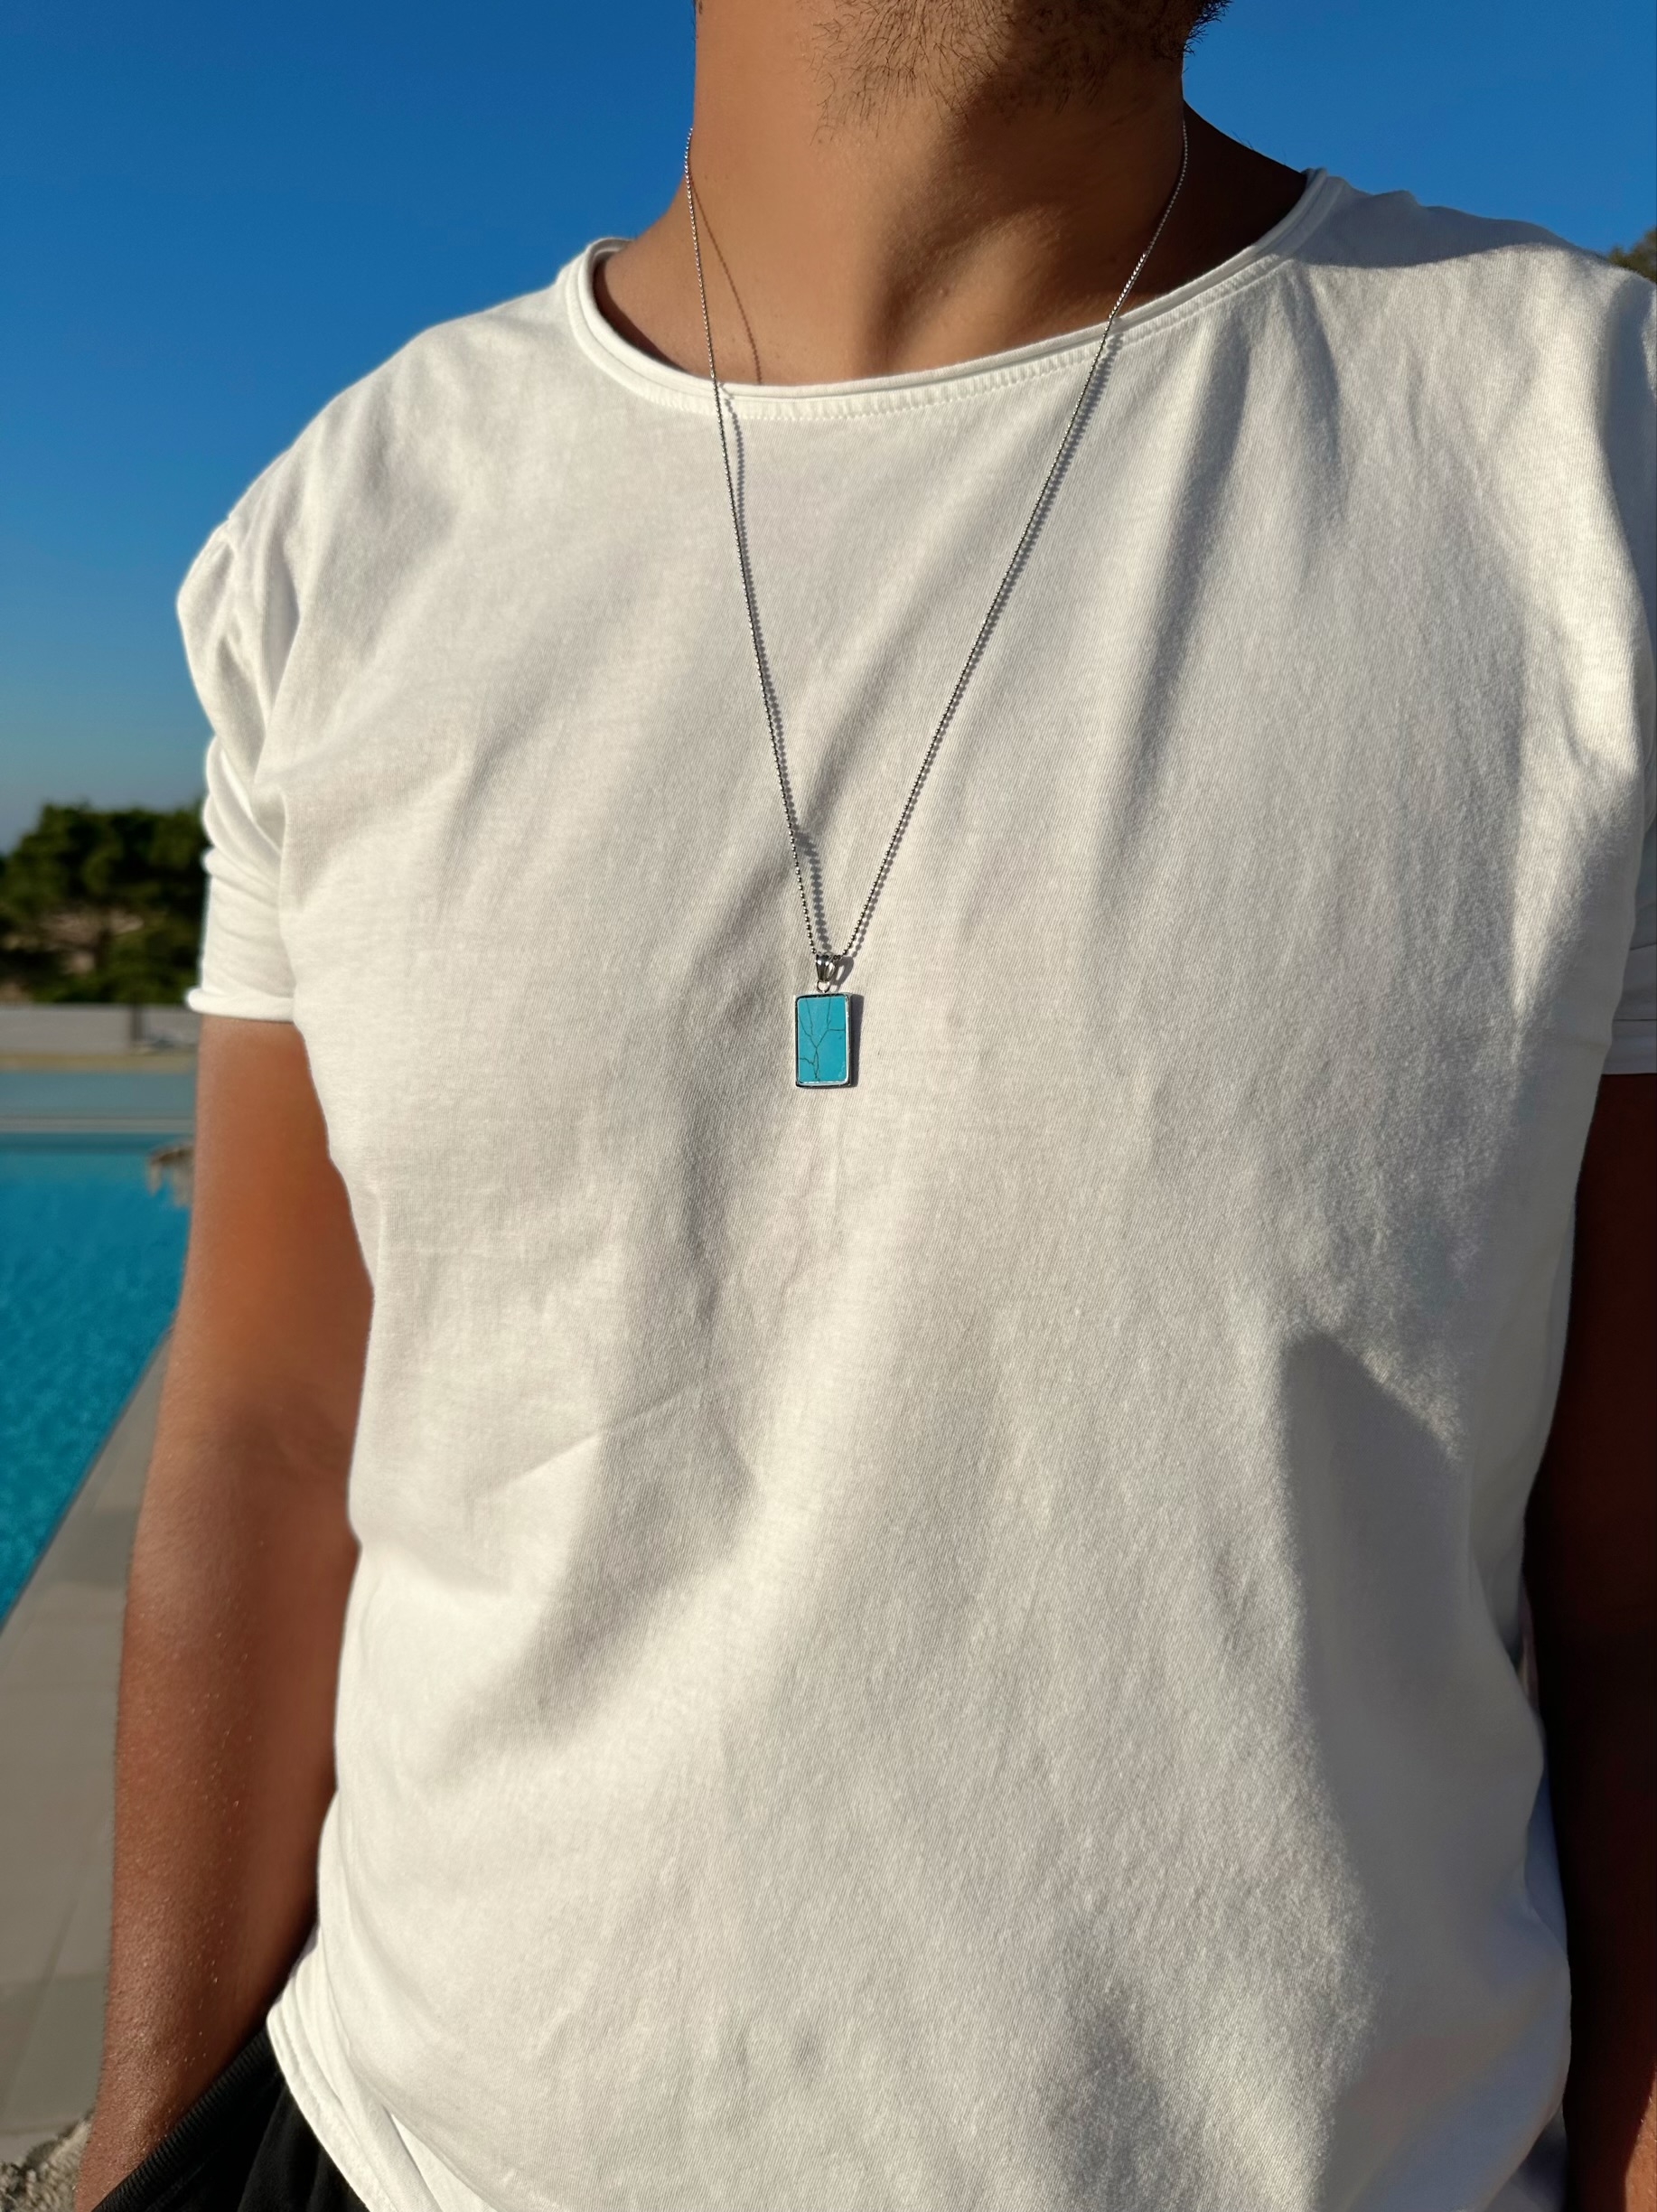 Throat Chakra Men's Silver Necklace - Turquoise | Charlotte's Web Jewelry |  Wolf & Badger